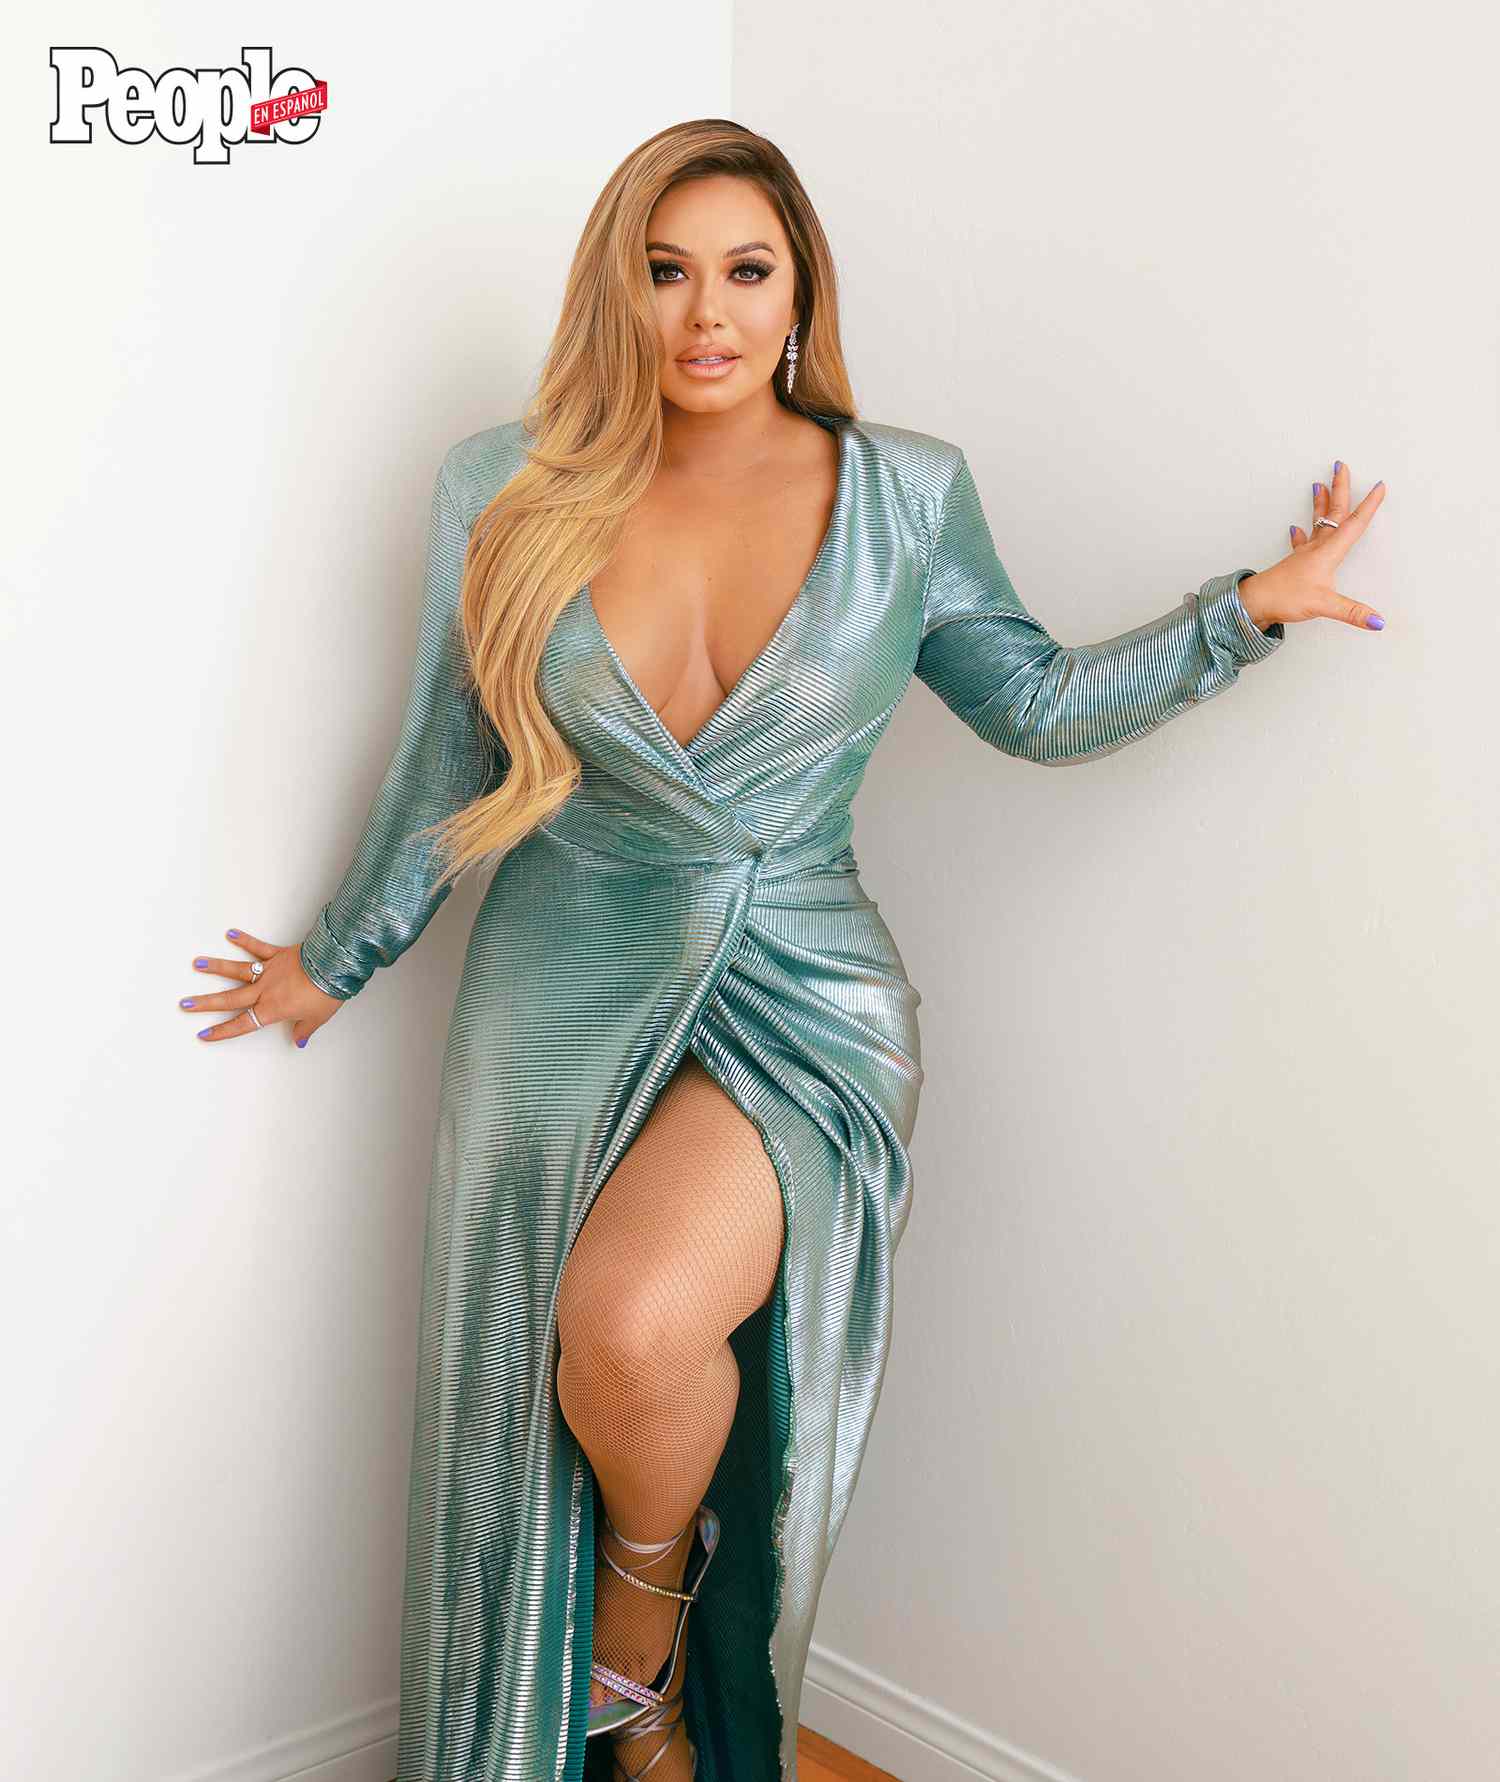 Chiquis Digital Cover - Chiquis - DO NOT REUSE